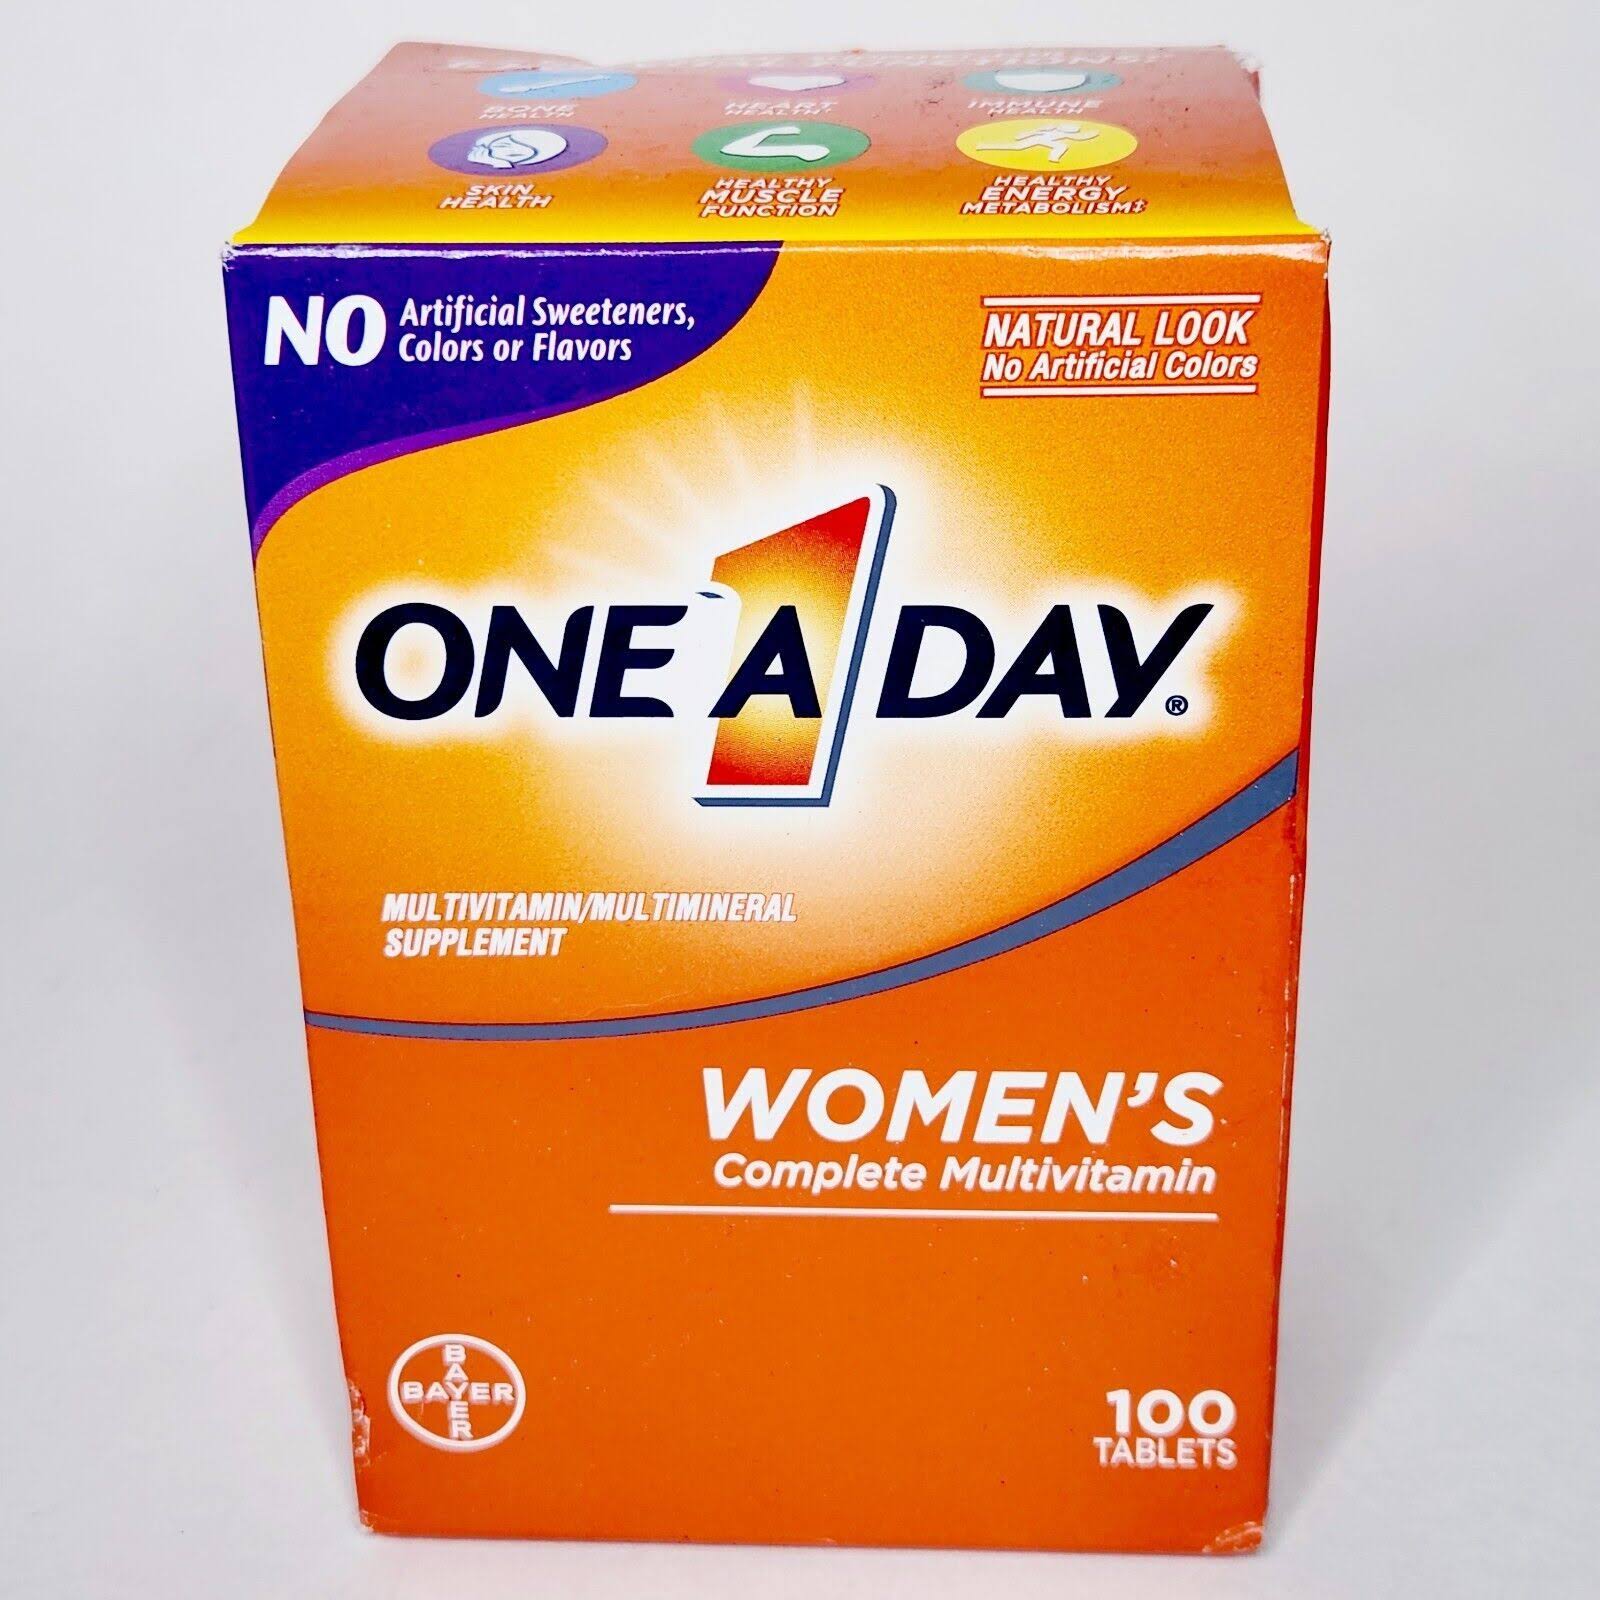 One-A-Day Women's Complete Multivitamin -- 100 Tablets